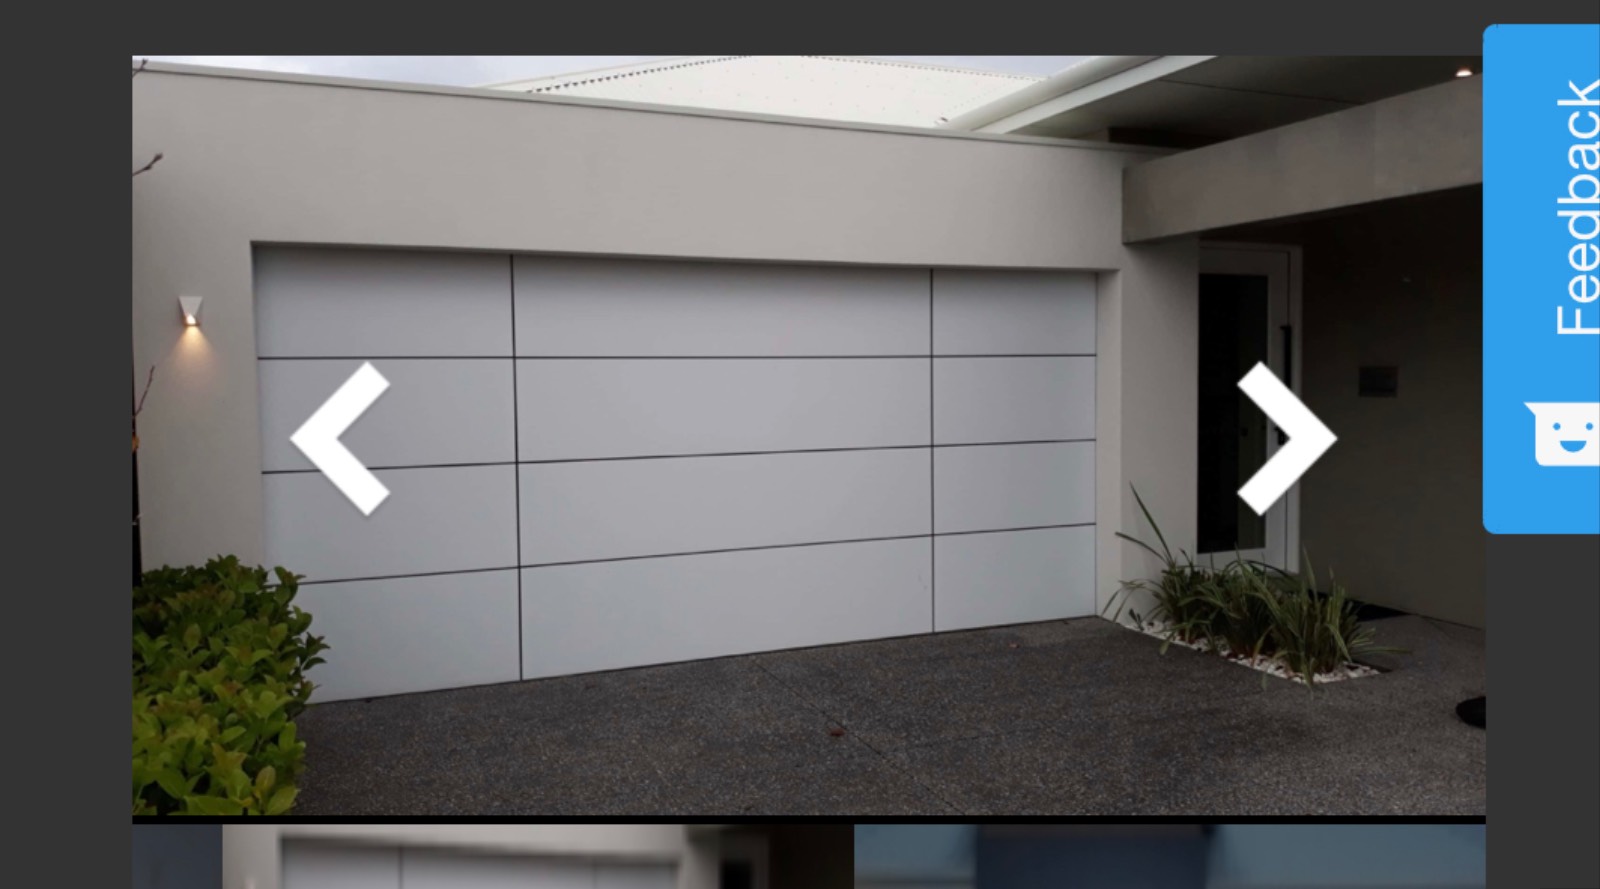 What is the cost to upgrade to a garage door like this?